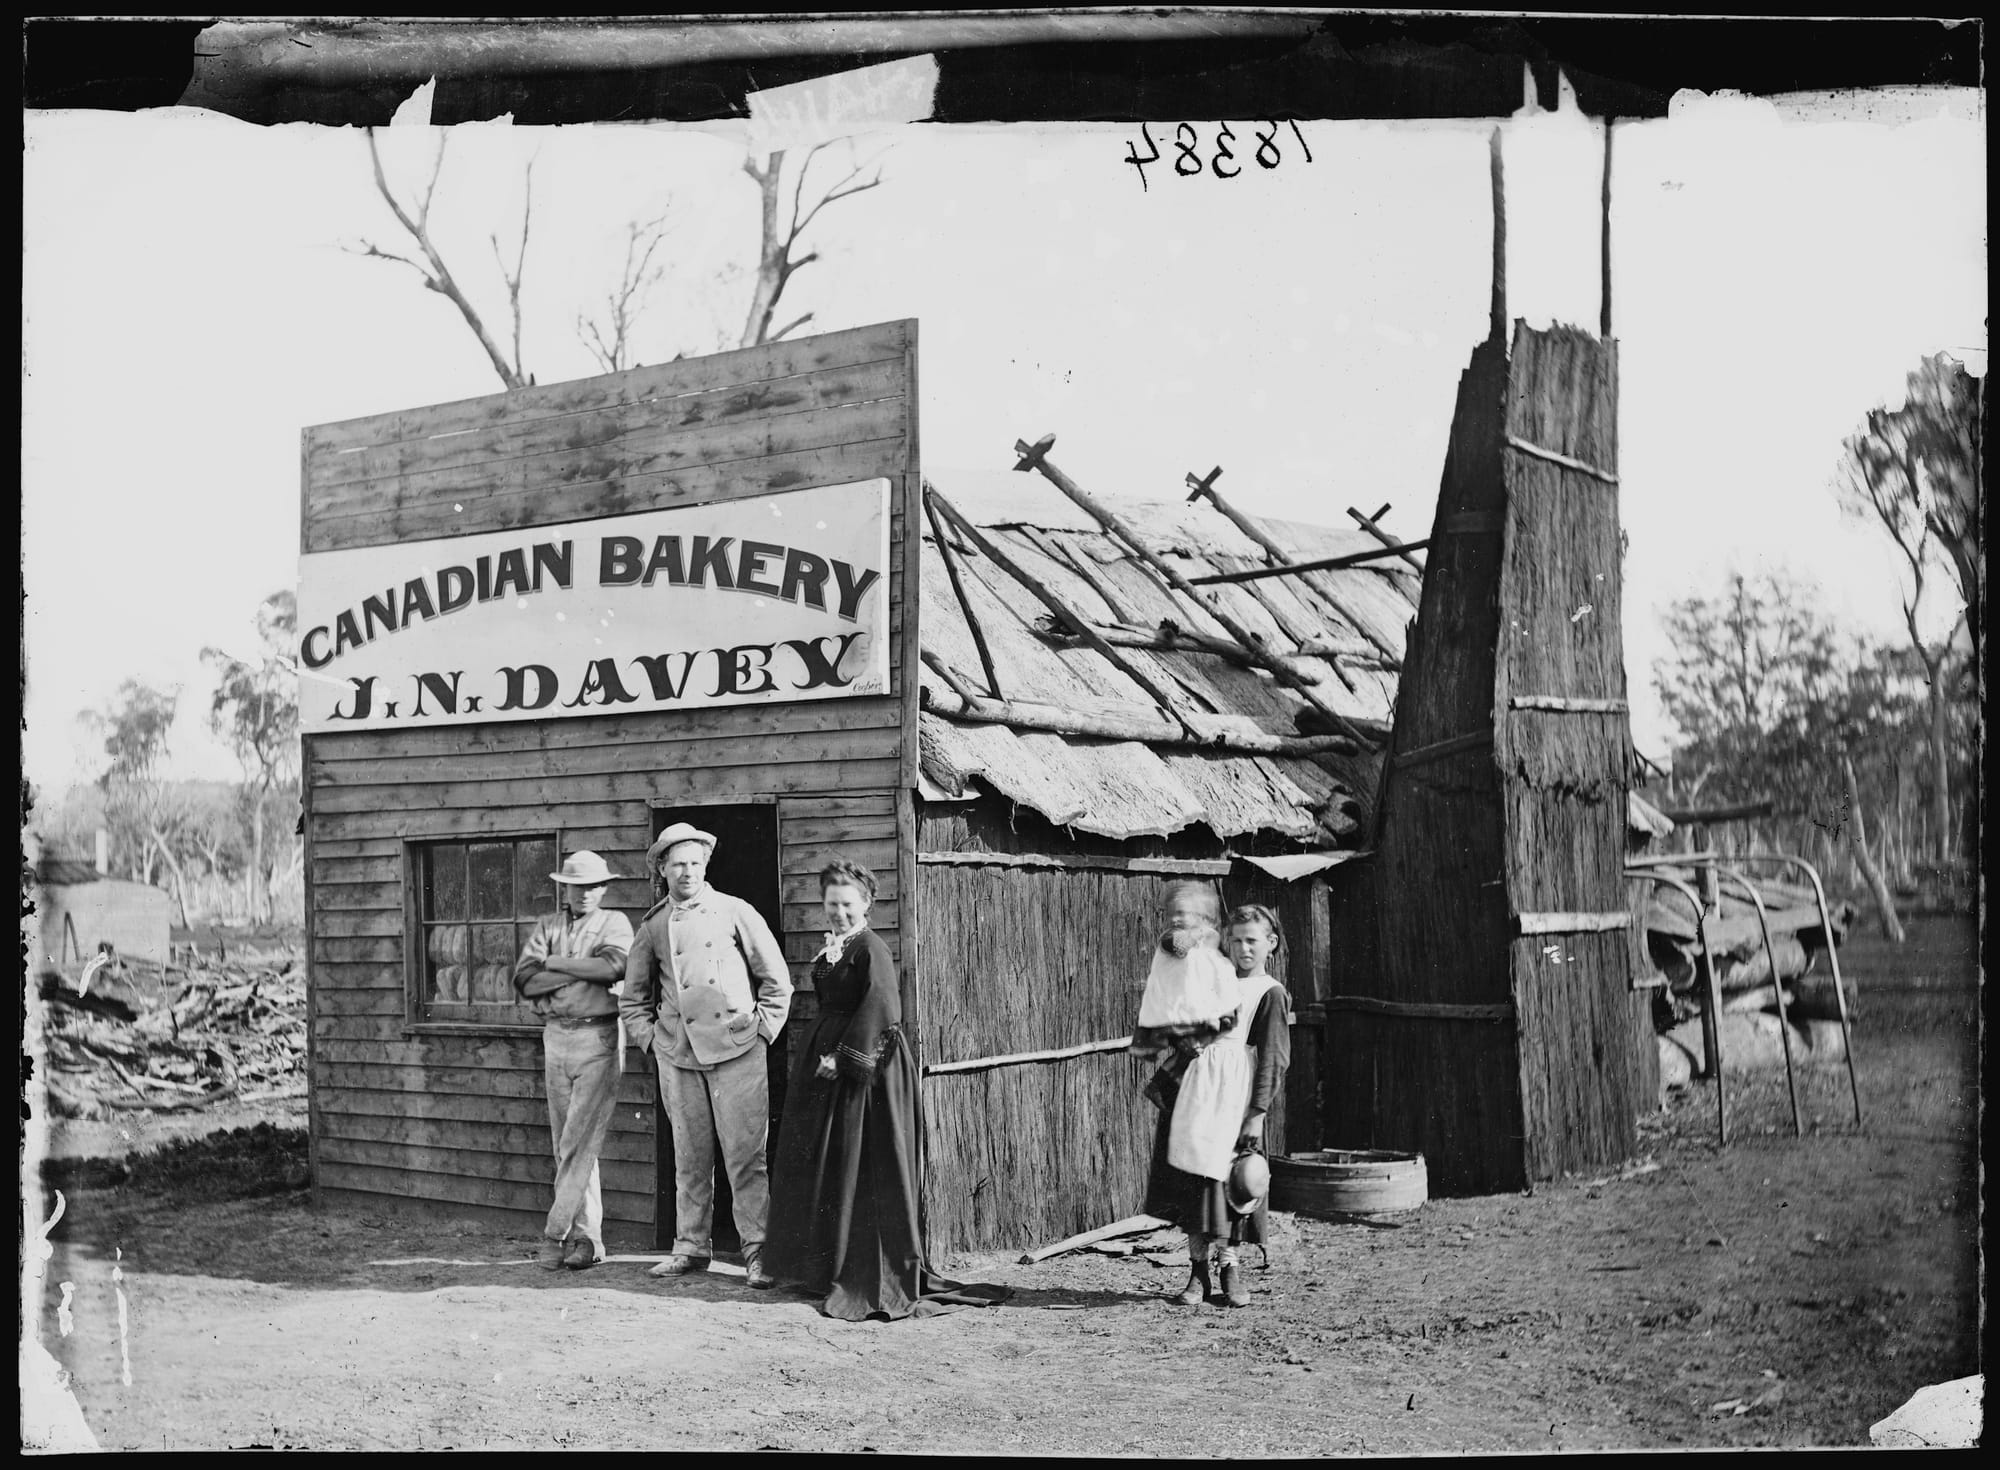 Four people and a baby posing in front of a basic structure that houses a bakery as advertised on the painted sign on the frontage.